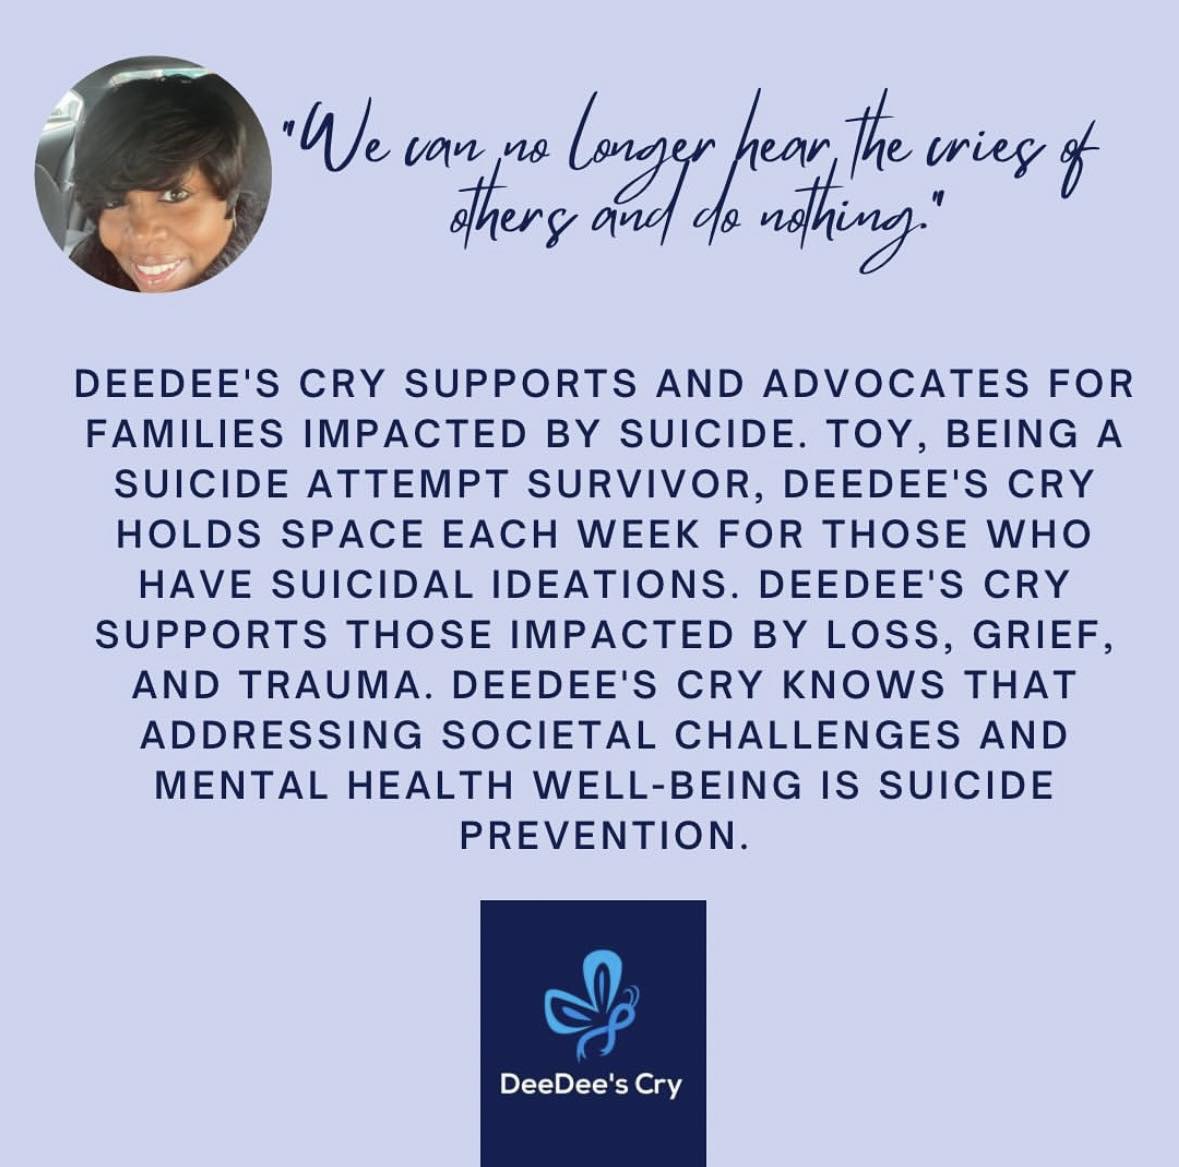 If 51% of America donates $10.00 to DeeDee's Cry and families impacted by suicide, we could support families with burial costs. Donate: deedeescry.org Follow us.